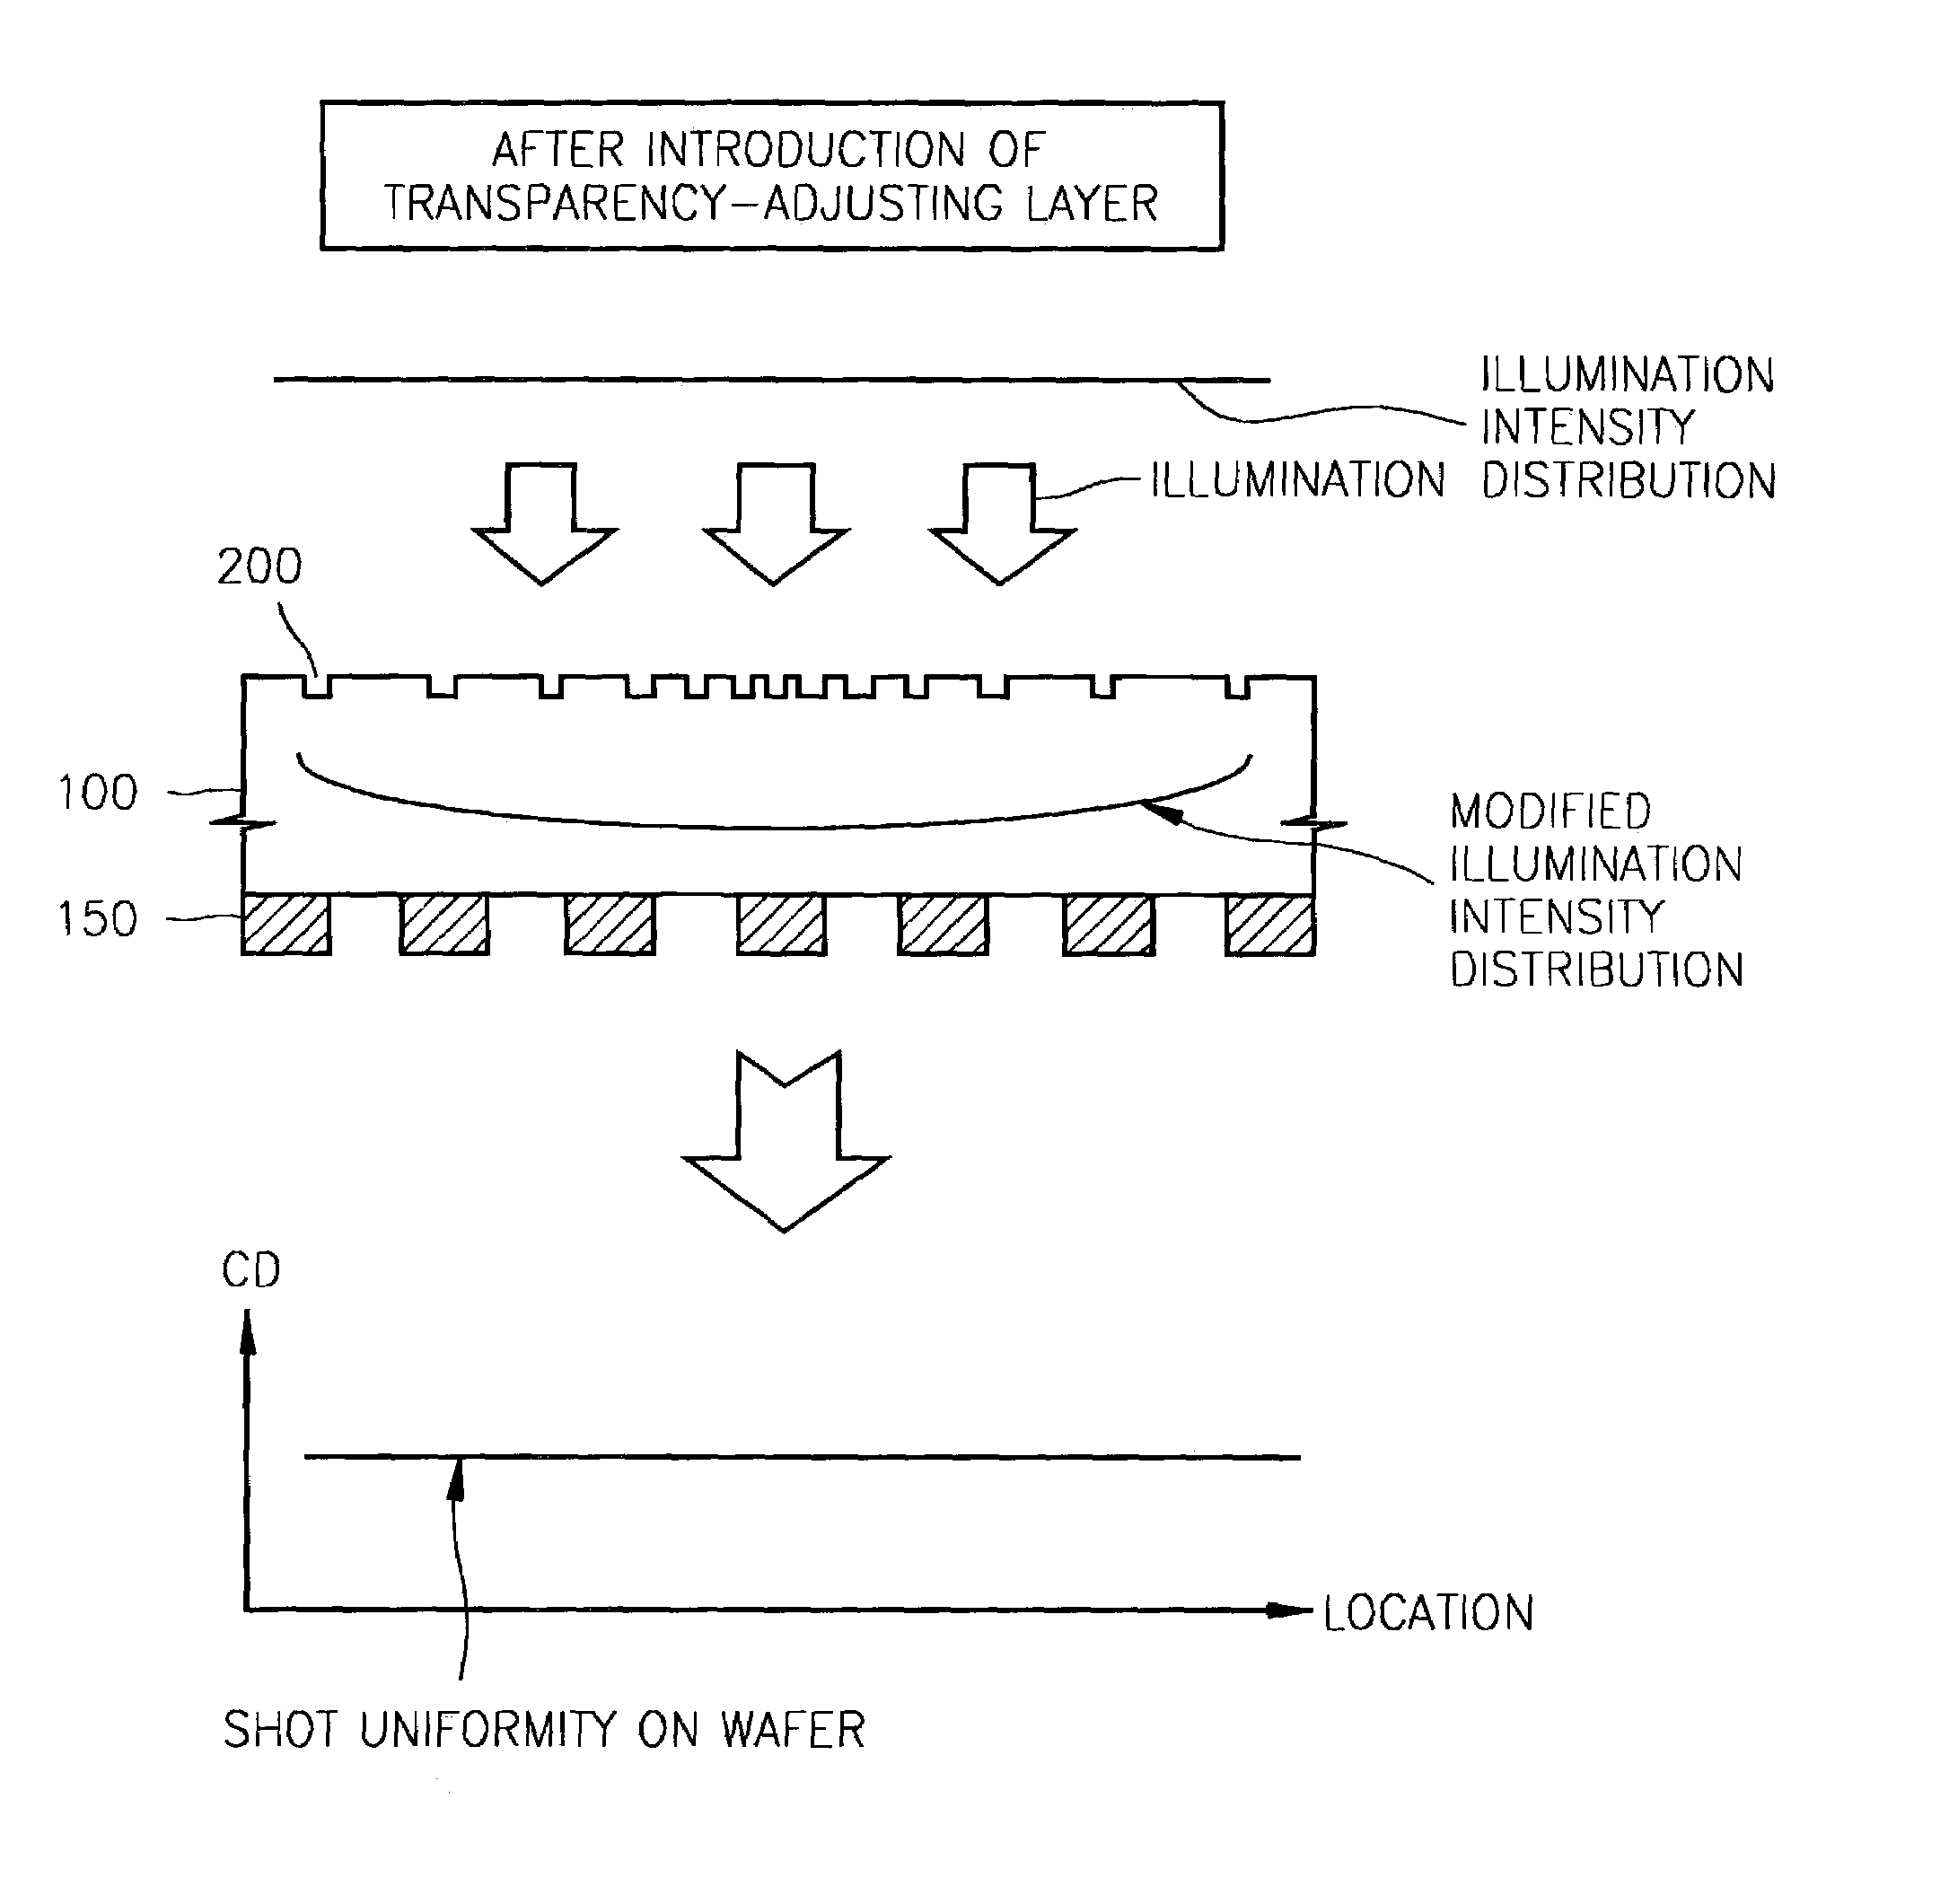 Photomask having a transparency-adjusting layer, method of manufacturing the photomask, and exposure method using the photomask